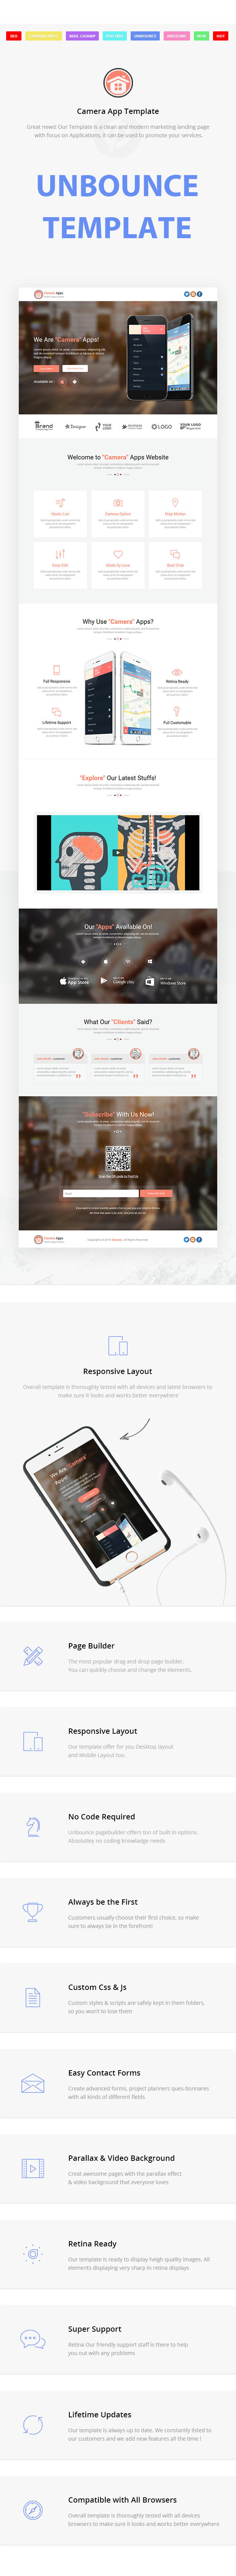 Camera Apps - Unbounce Landing Page - 1